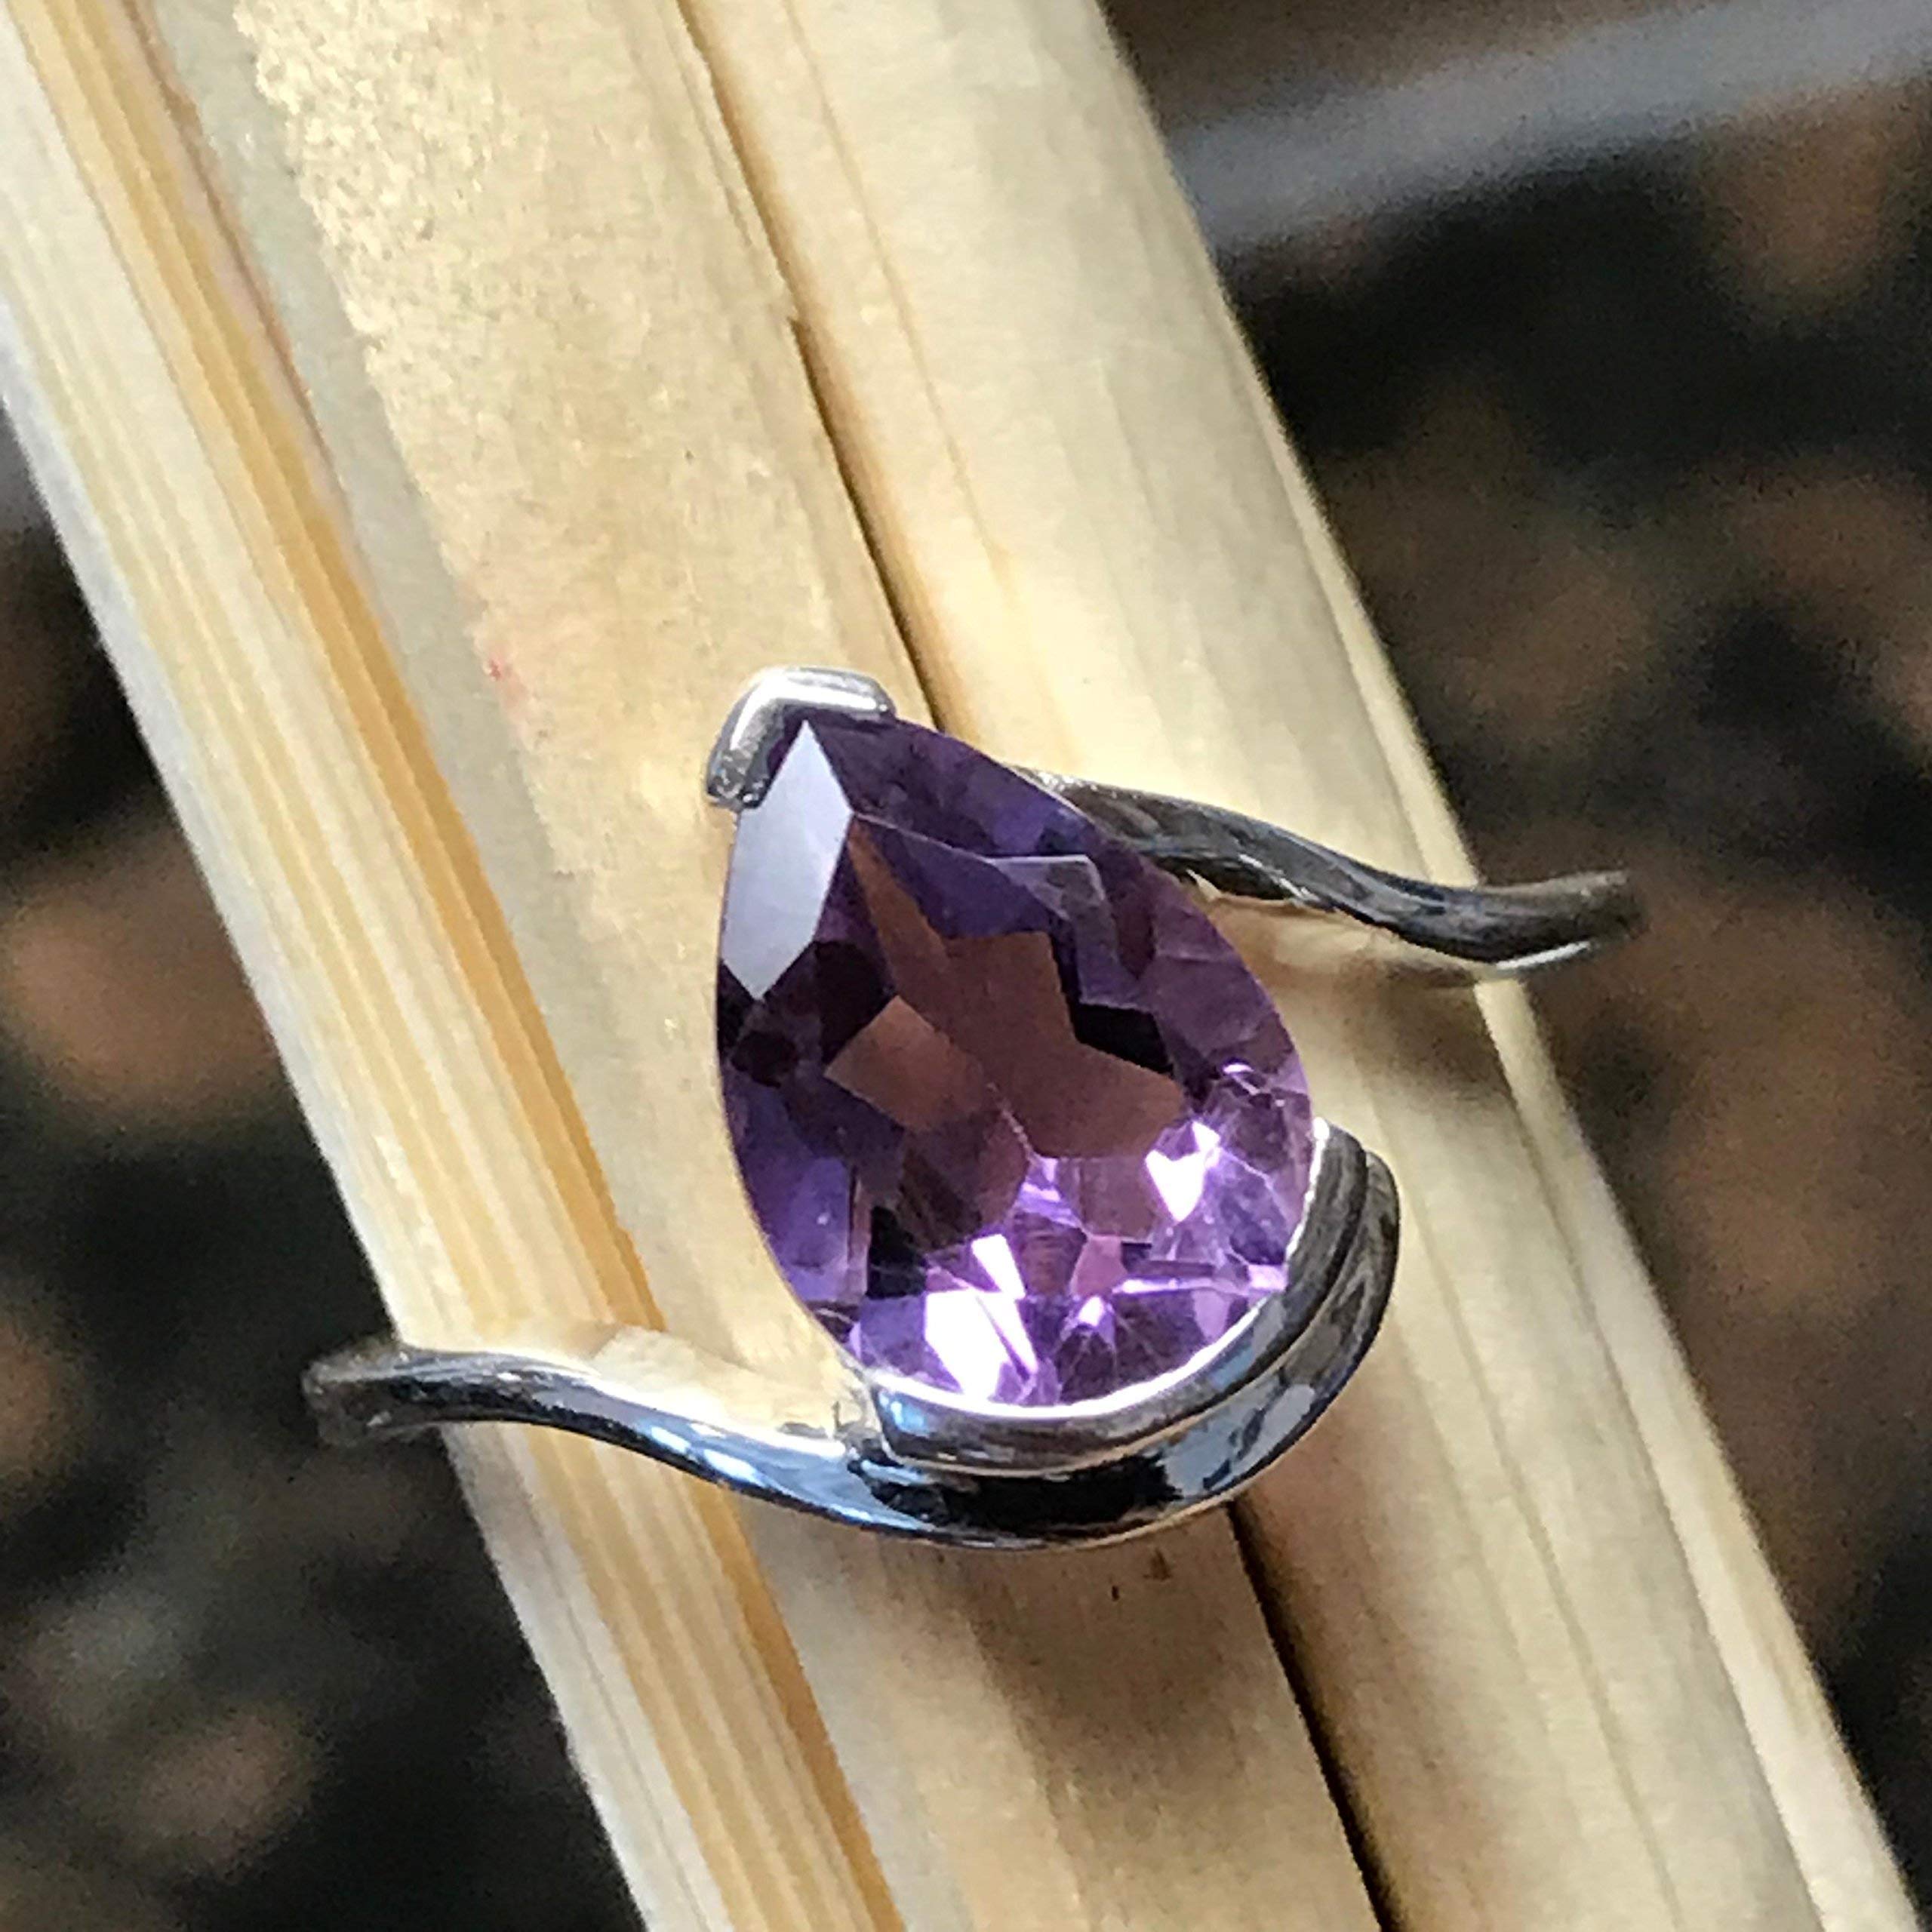 Genuine 2ct Purple Amethyst 925 Solid Sterling Silver Ring Size 6, 7, 8, 9, 10 - Natural Rocks by Kala